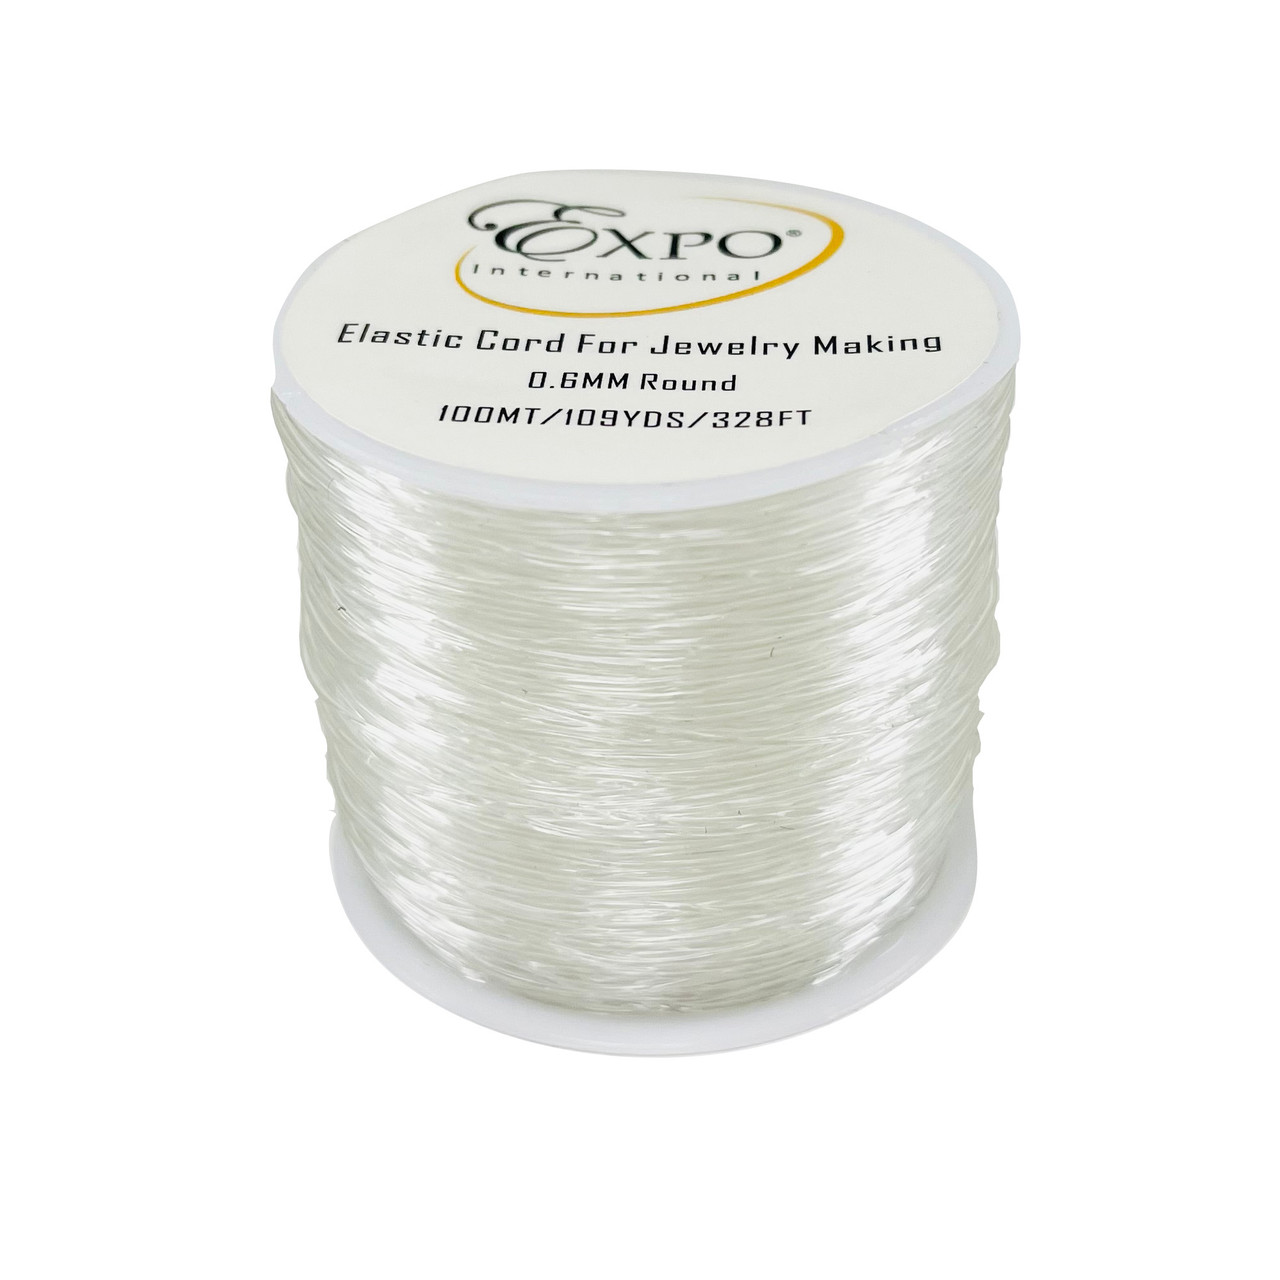 Elastic Stretch String Cord for Jewelry Making 0.6mm, in 100m Spool